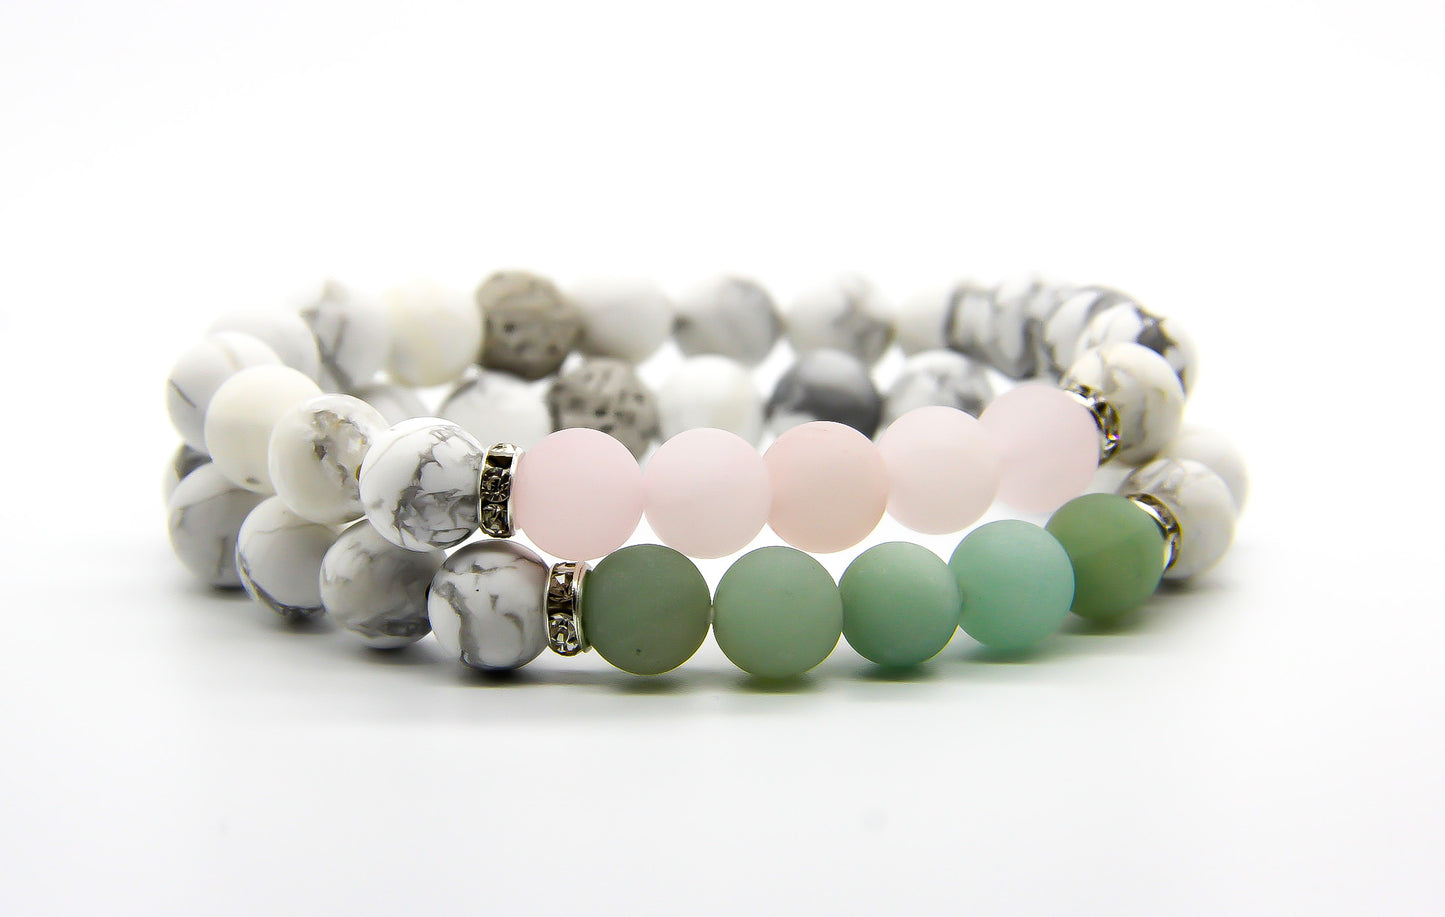 Stone bracelets with white, pink and green beads and silver & crystal detail